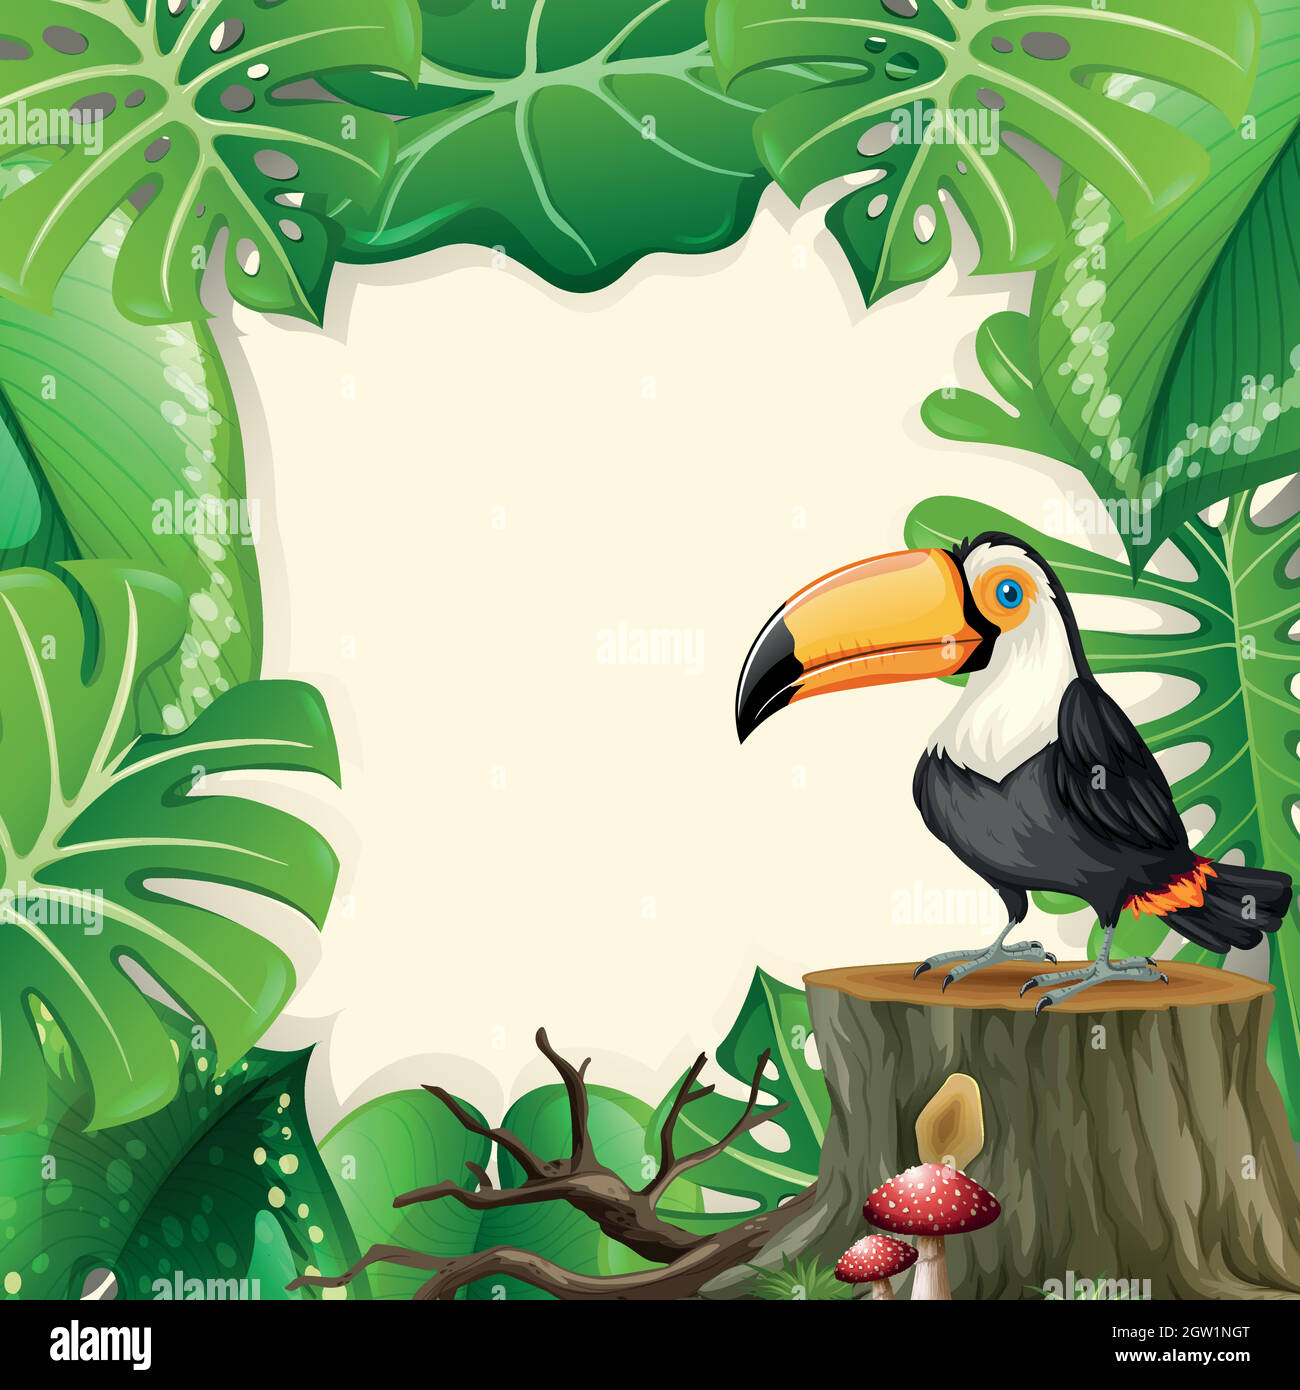 Large toucan forest frame Stock Vector